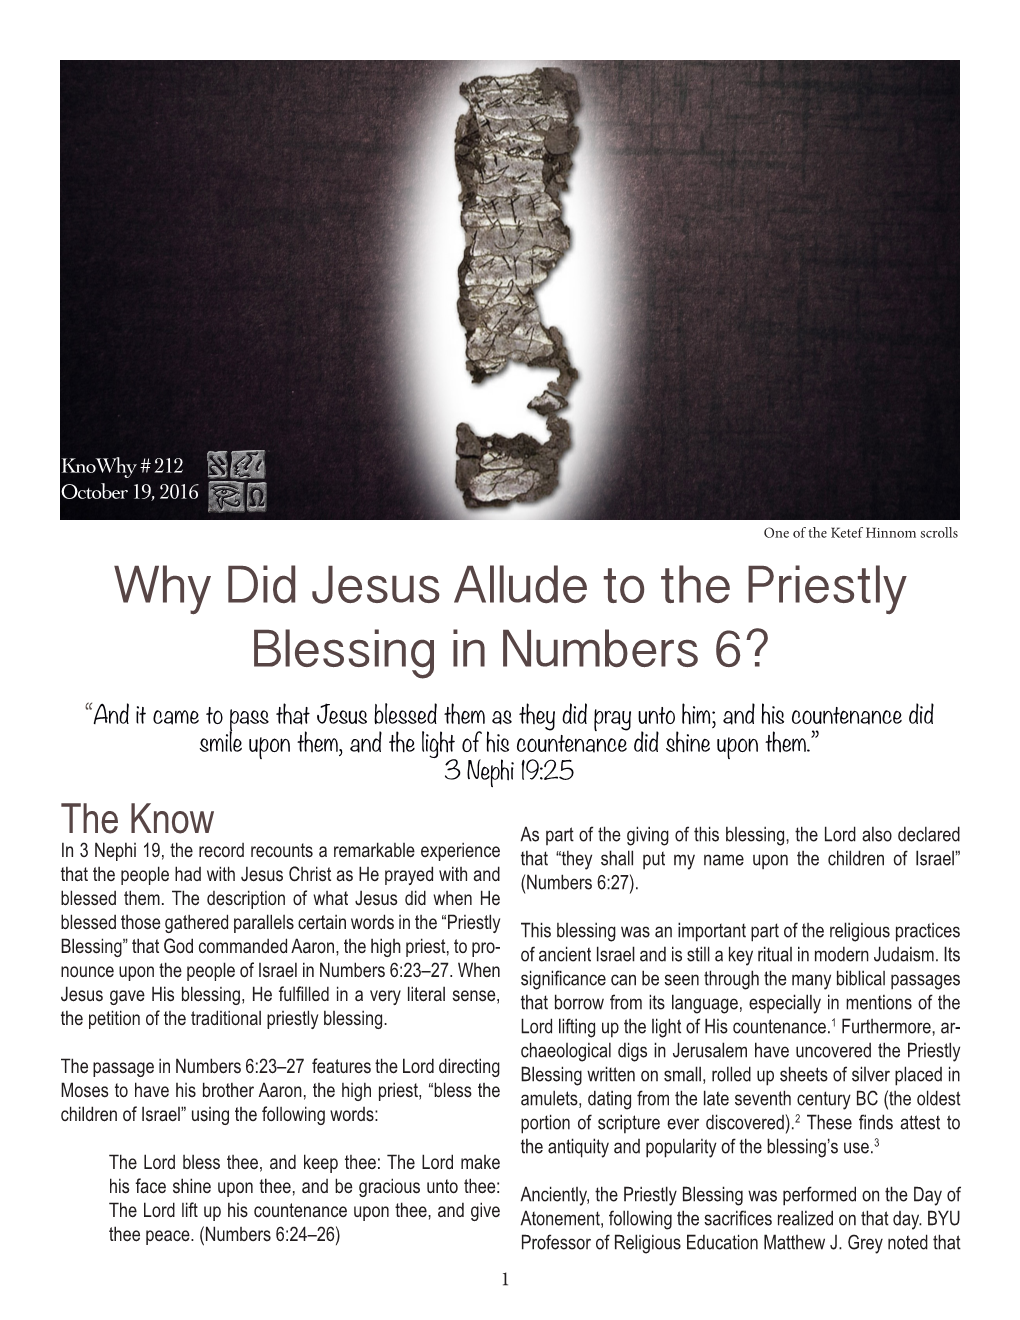 Why Did Jesus Allude to the Priestly Blessing in Numbers 6?